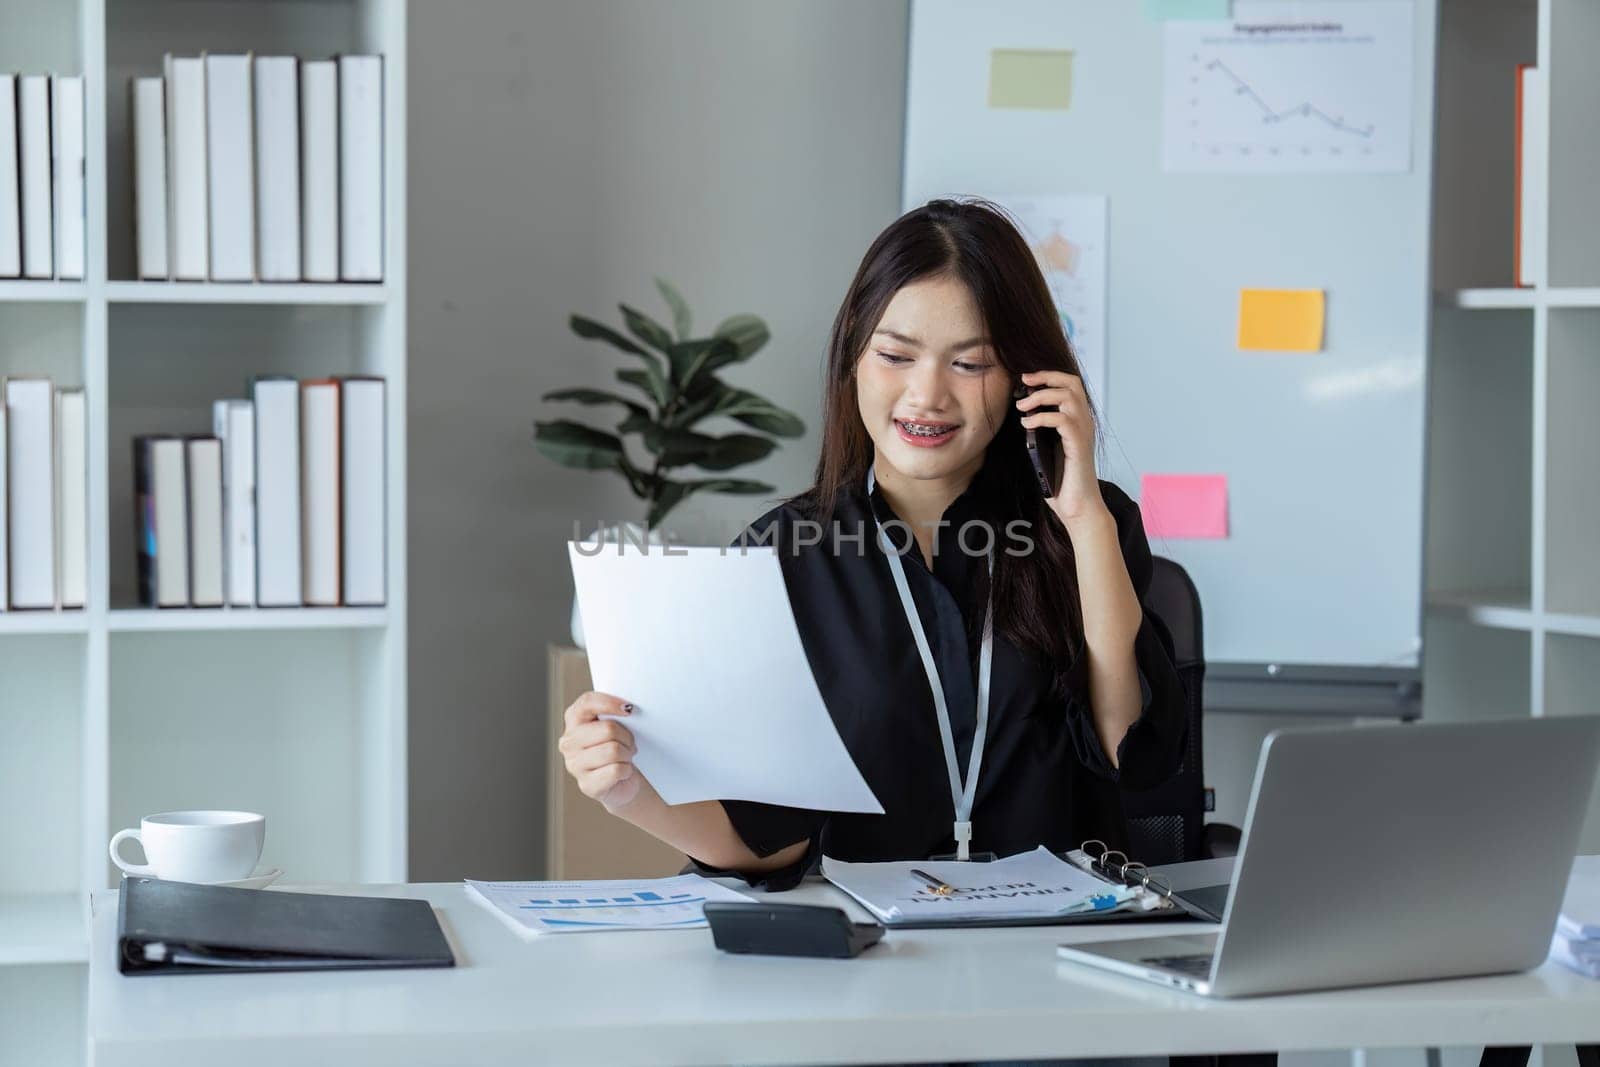 Businesswoman on the phone and using laptop at office. Businesswoman professional talking on mobile phone.